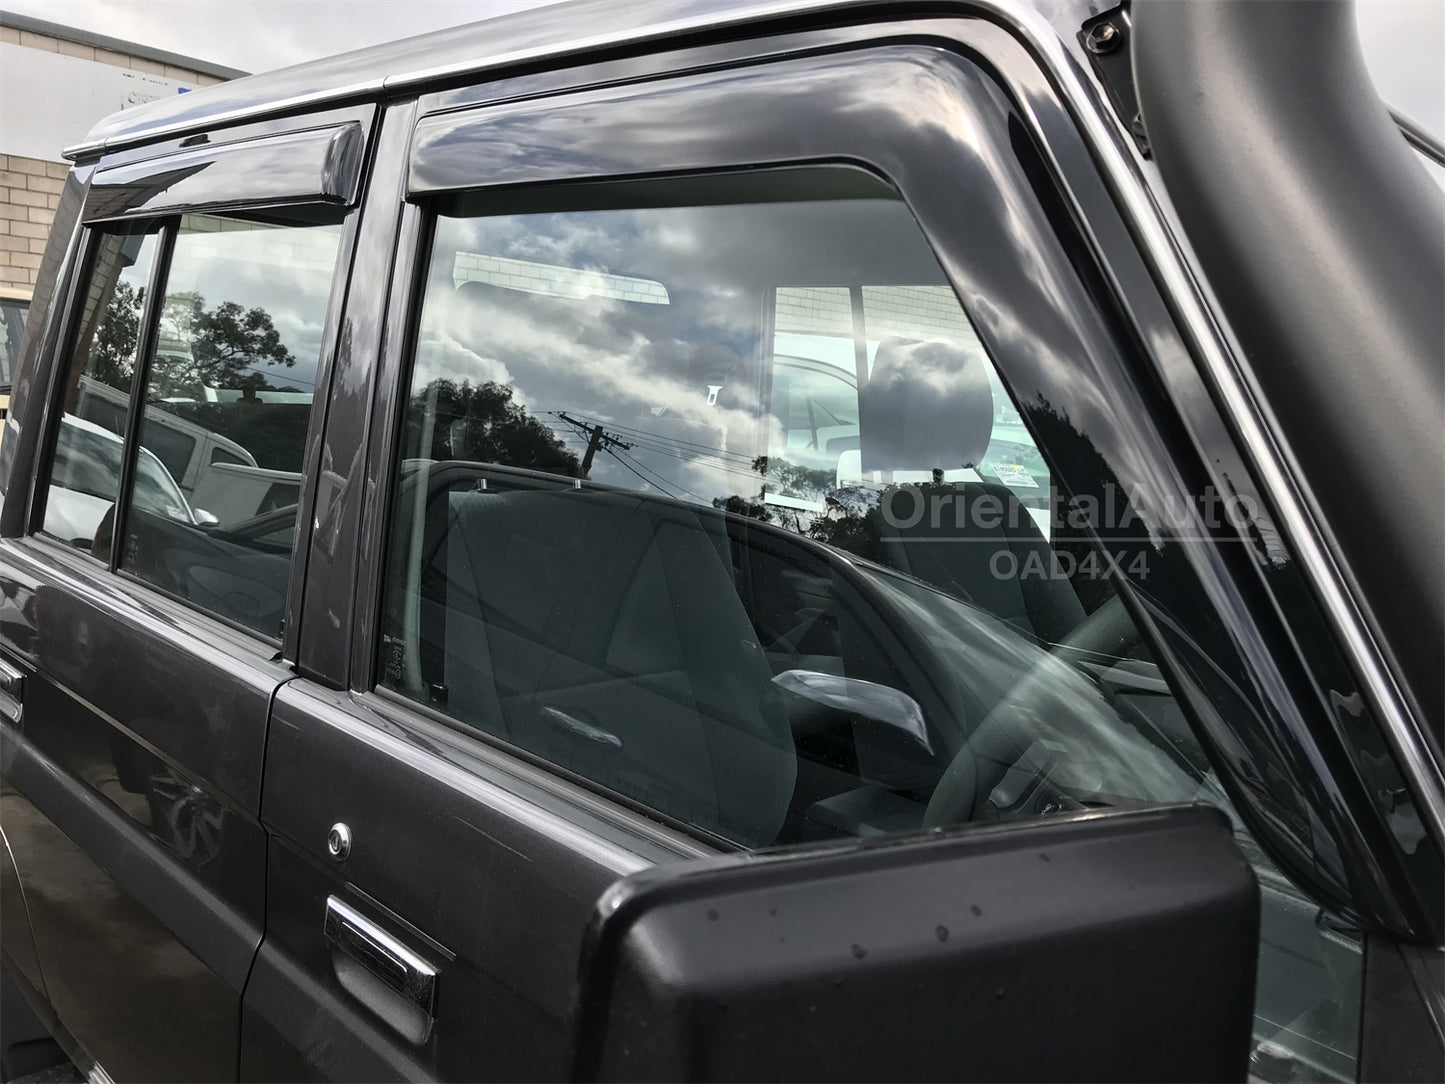 Pre-order Luxury Weather Shields & 3D Dash Mat for Toyota Landcruiser Land Cruiser 70 76 79 2009-2023 Weathershields Window Visors + Dashboard Cover for LC70 LC76 LC79